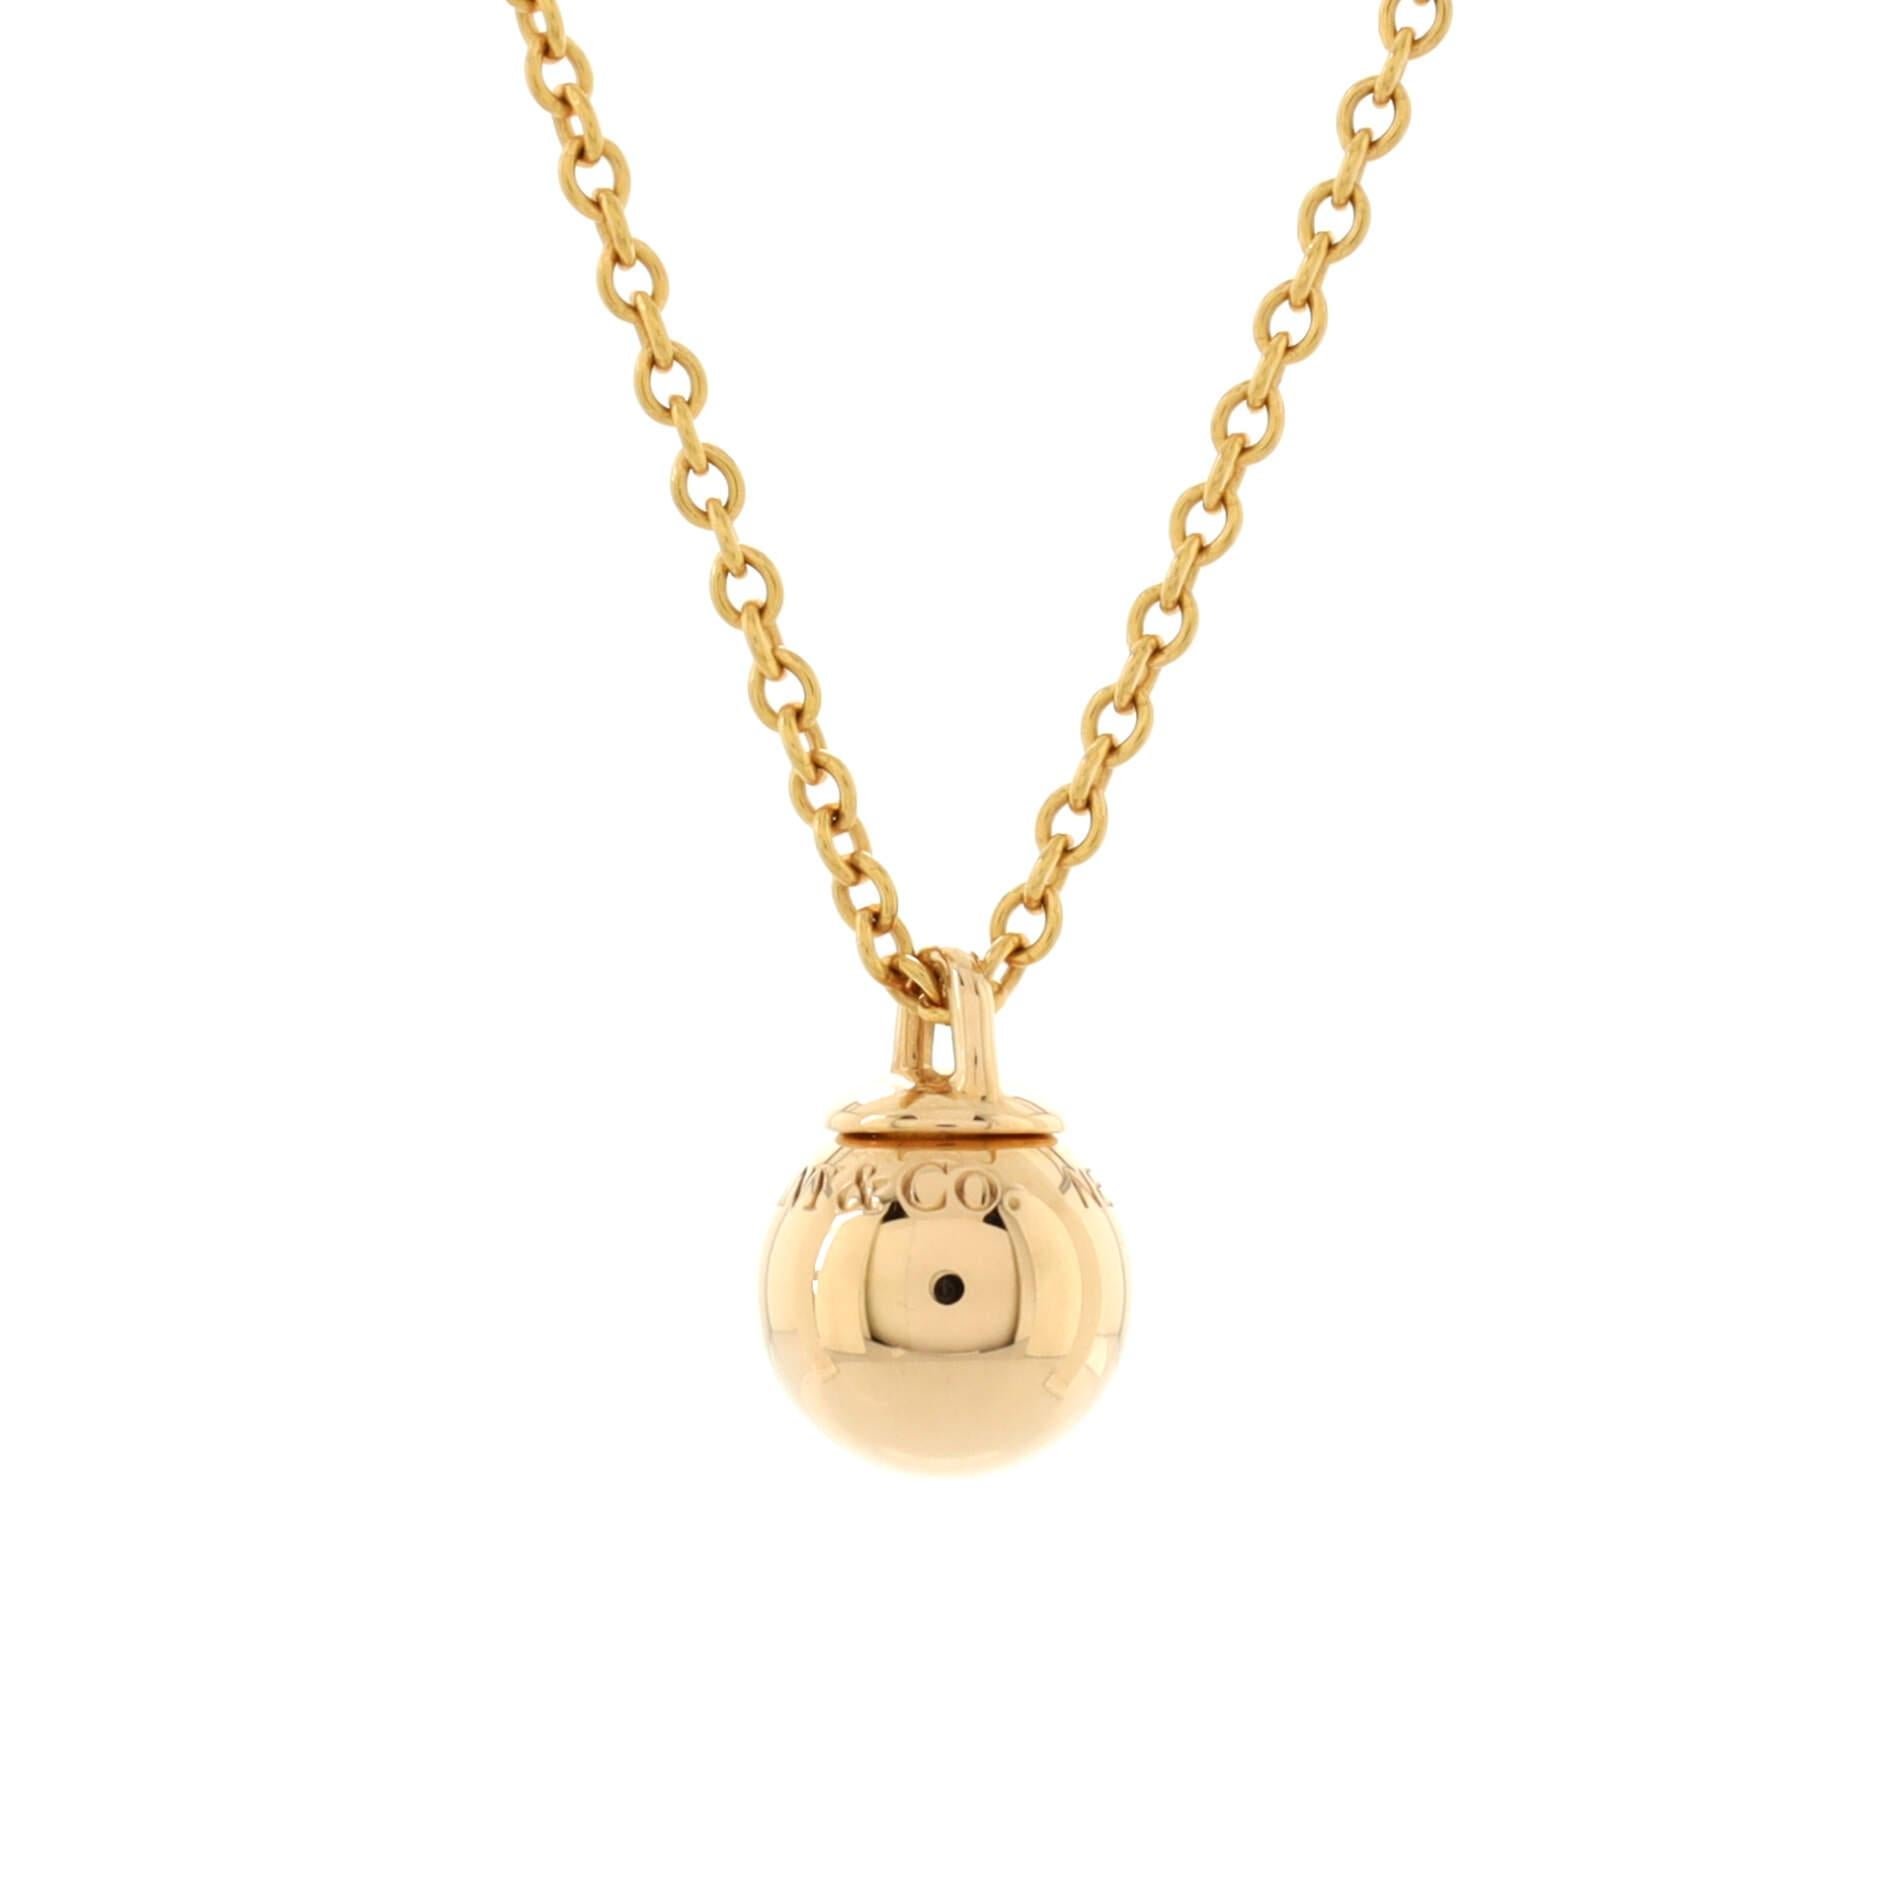 Tiffany Hardwear Small Link Necklace in Rose Gold, Size: 18 in.